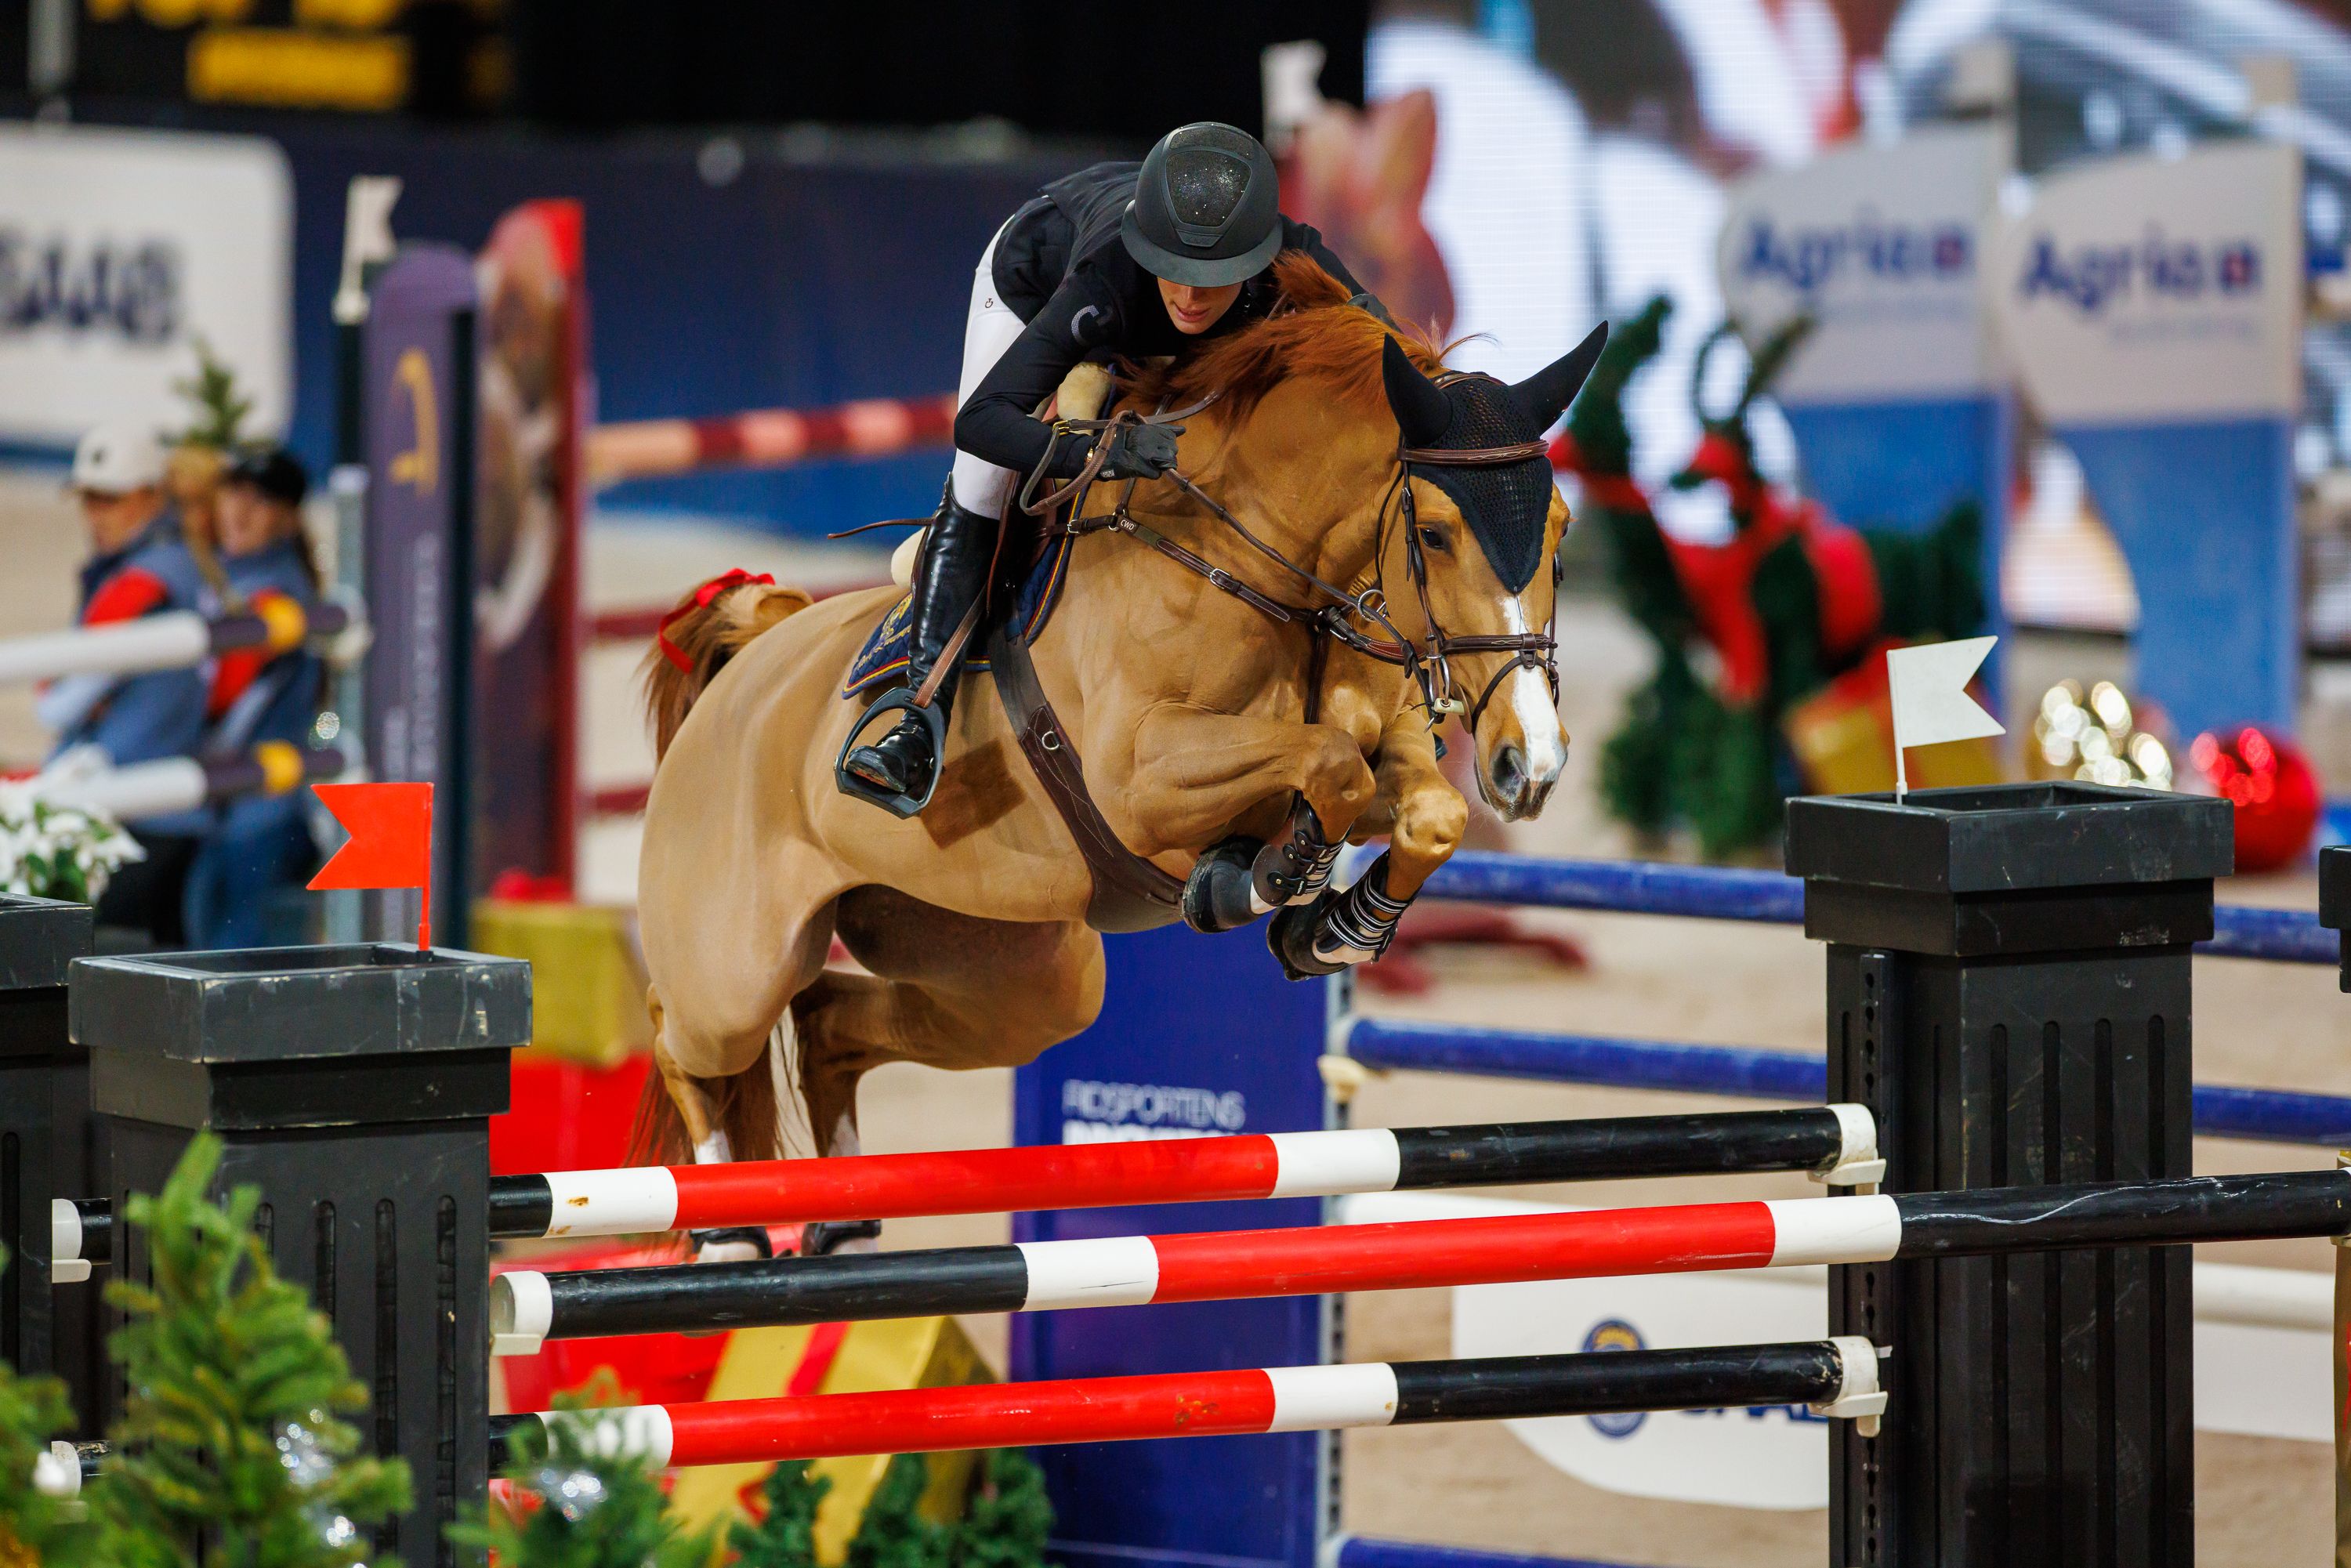 Jessica Springsteen triumphs in the 1.50m main class of Stockholm